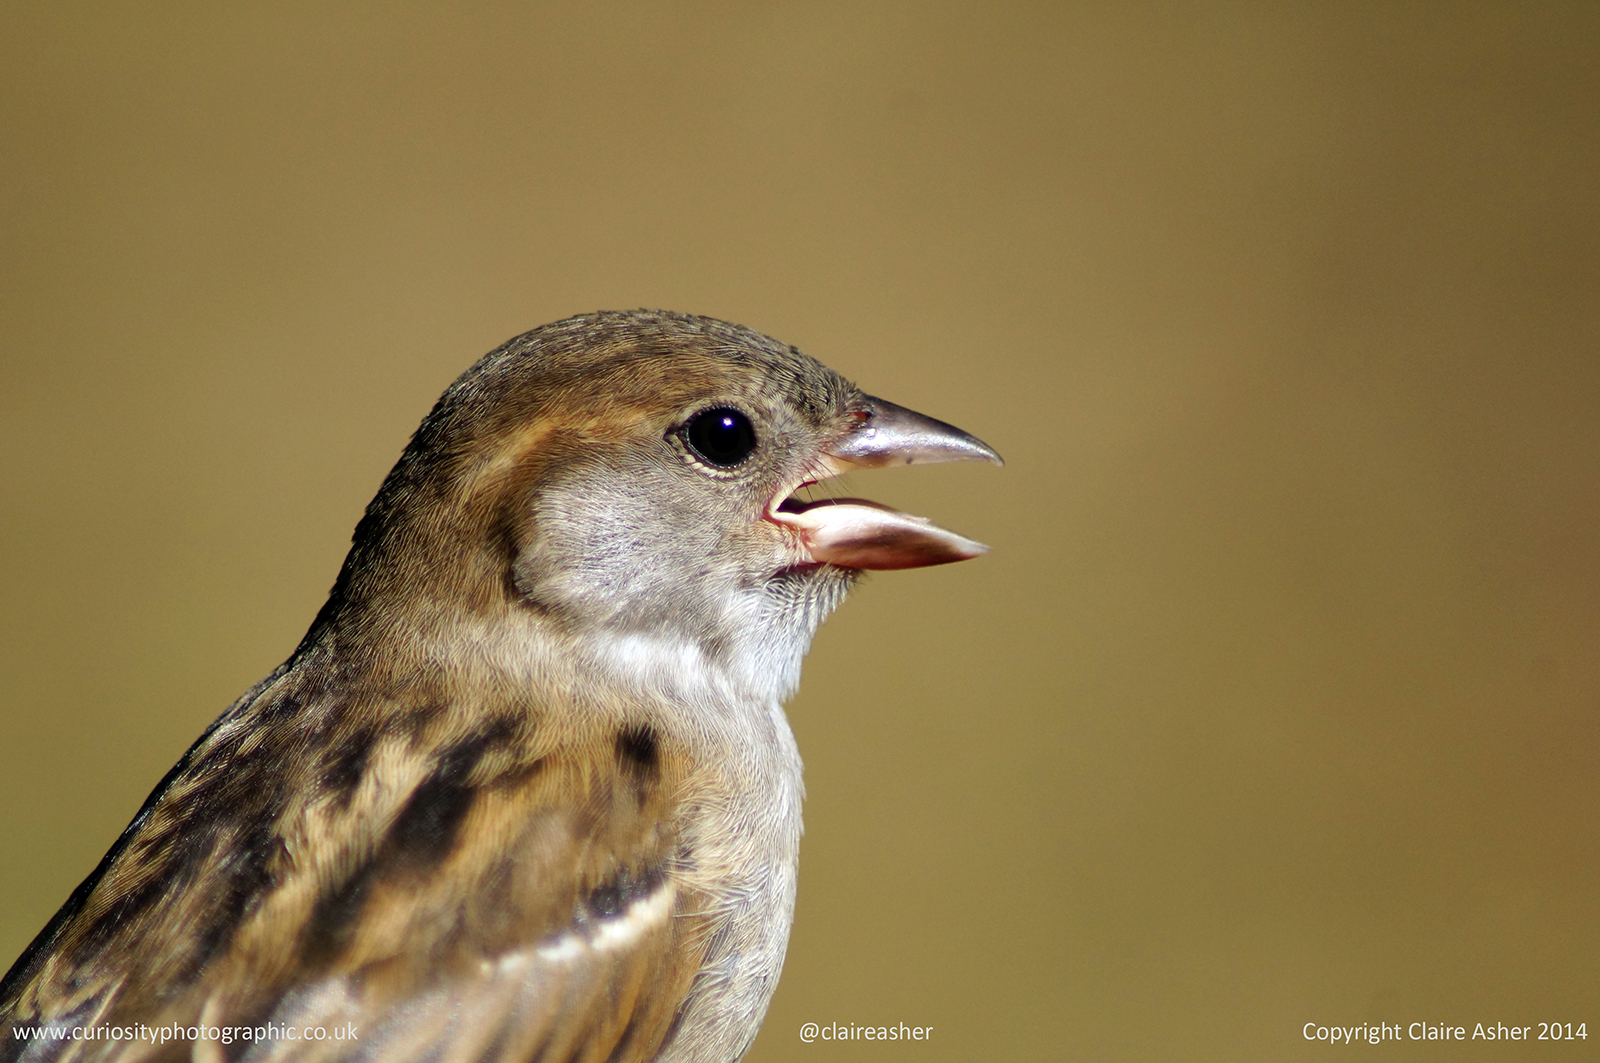 A female house sparrow (Passer domesticus photographed in New Zealand in 2014